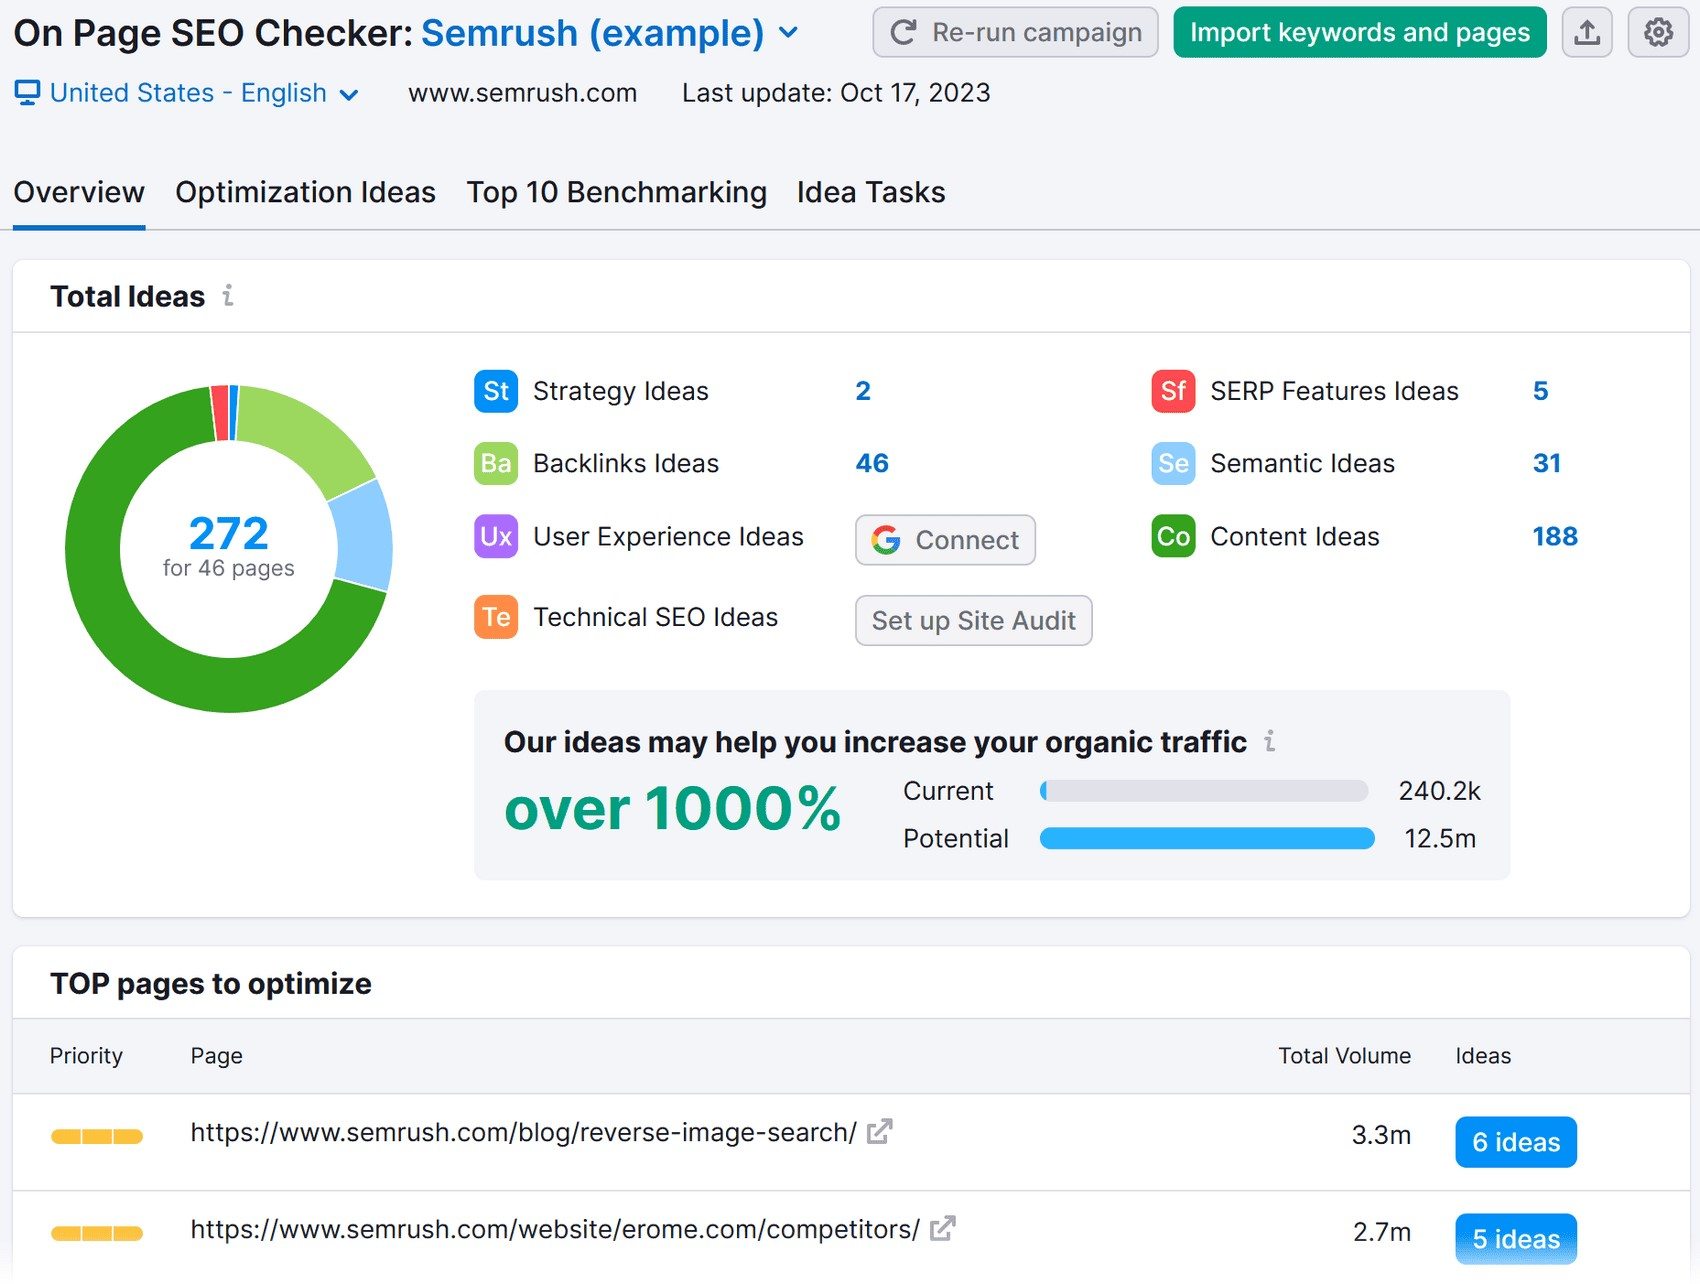 On Page SEO Checker "Overview" dashboard for "Sermush (example)" project